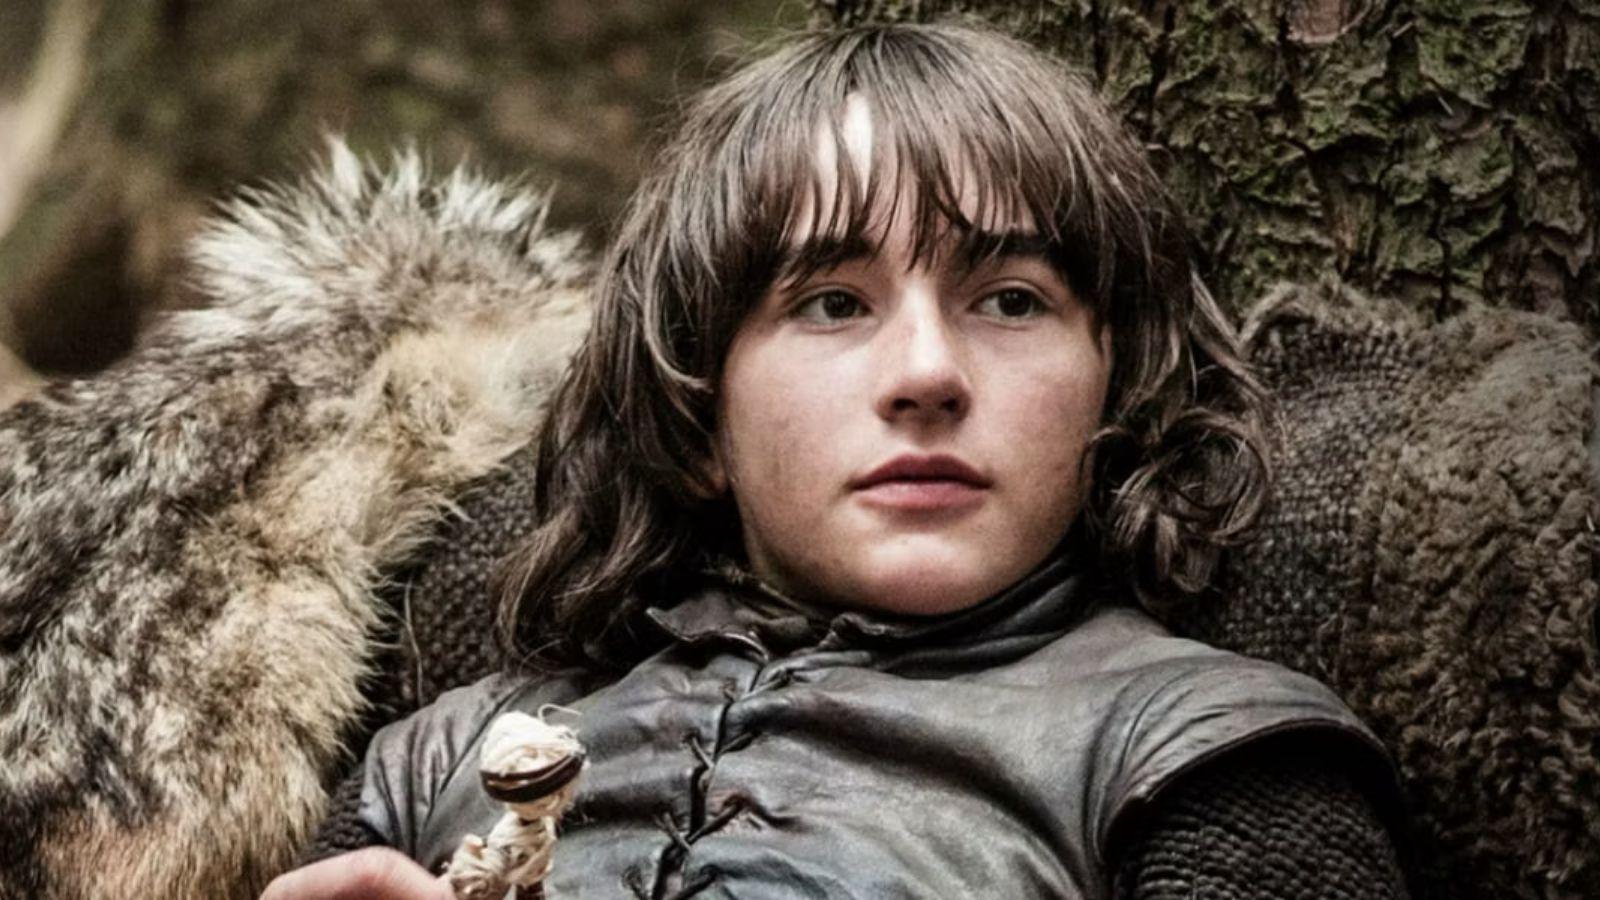 Bran Stark in Game of Thrones before House of the Dragon